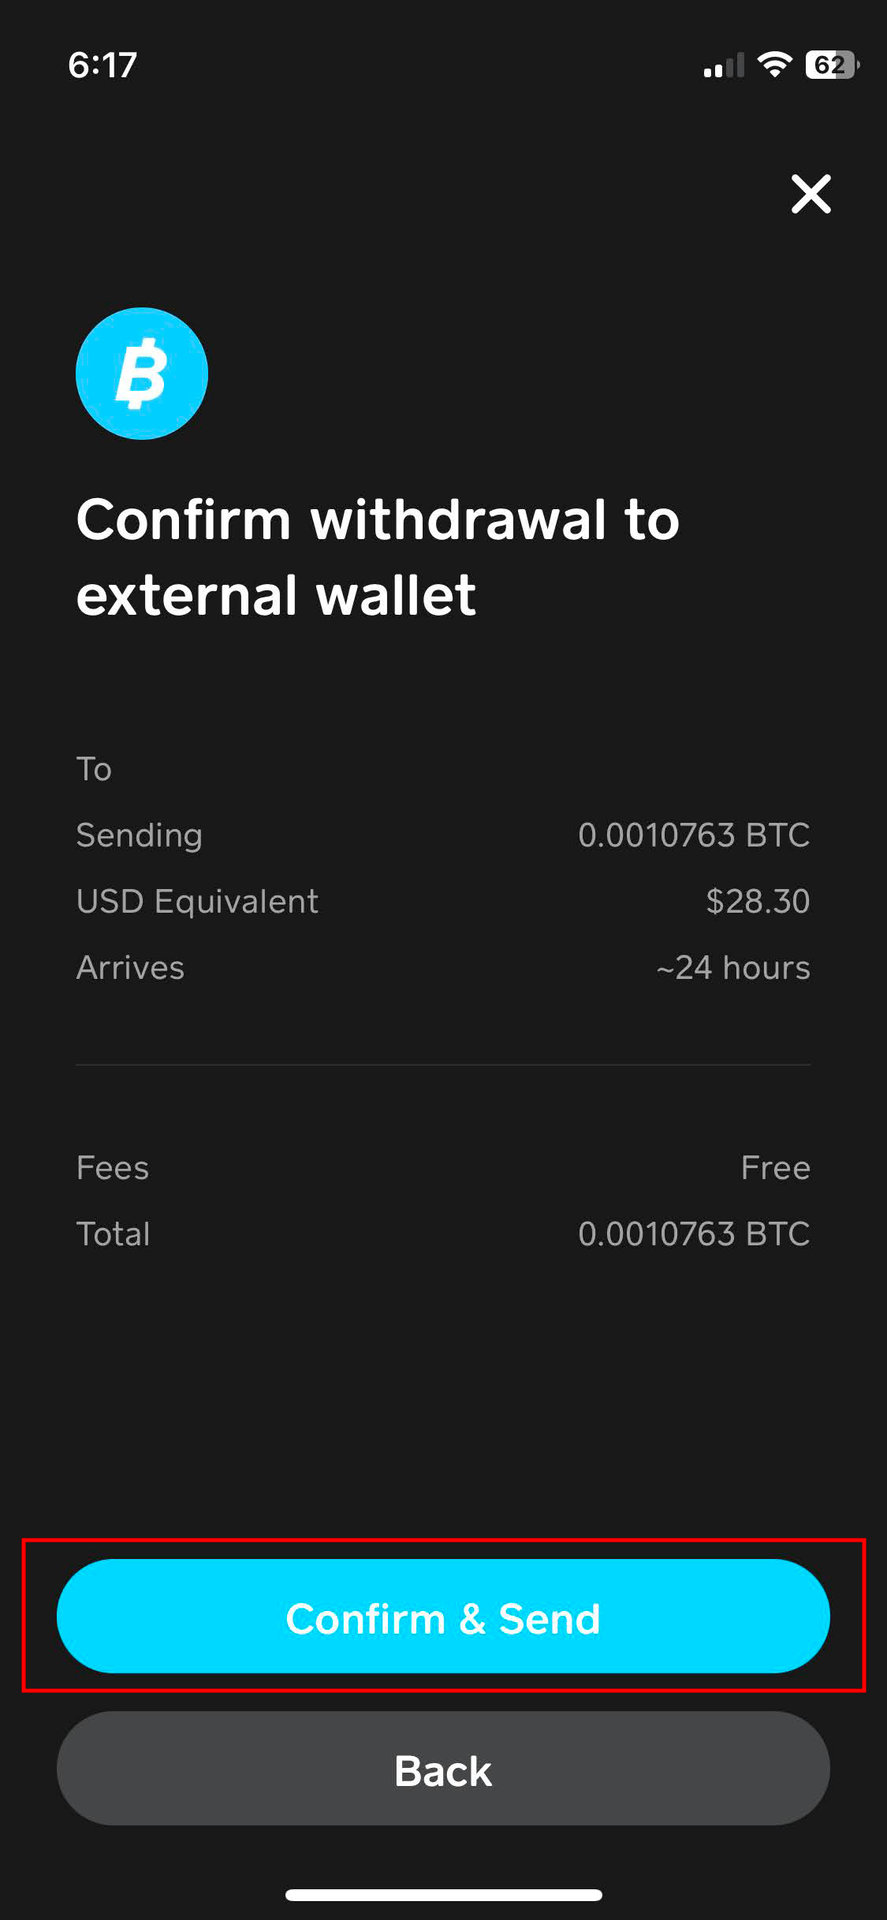 How to send Bitcoin on Cash App - Android Authority